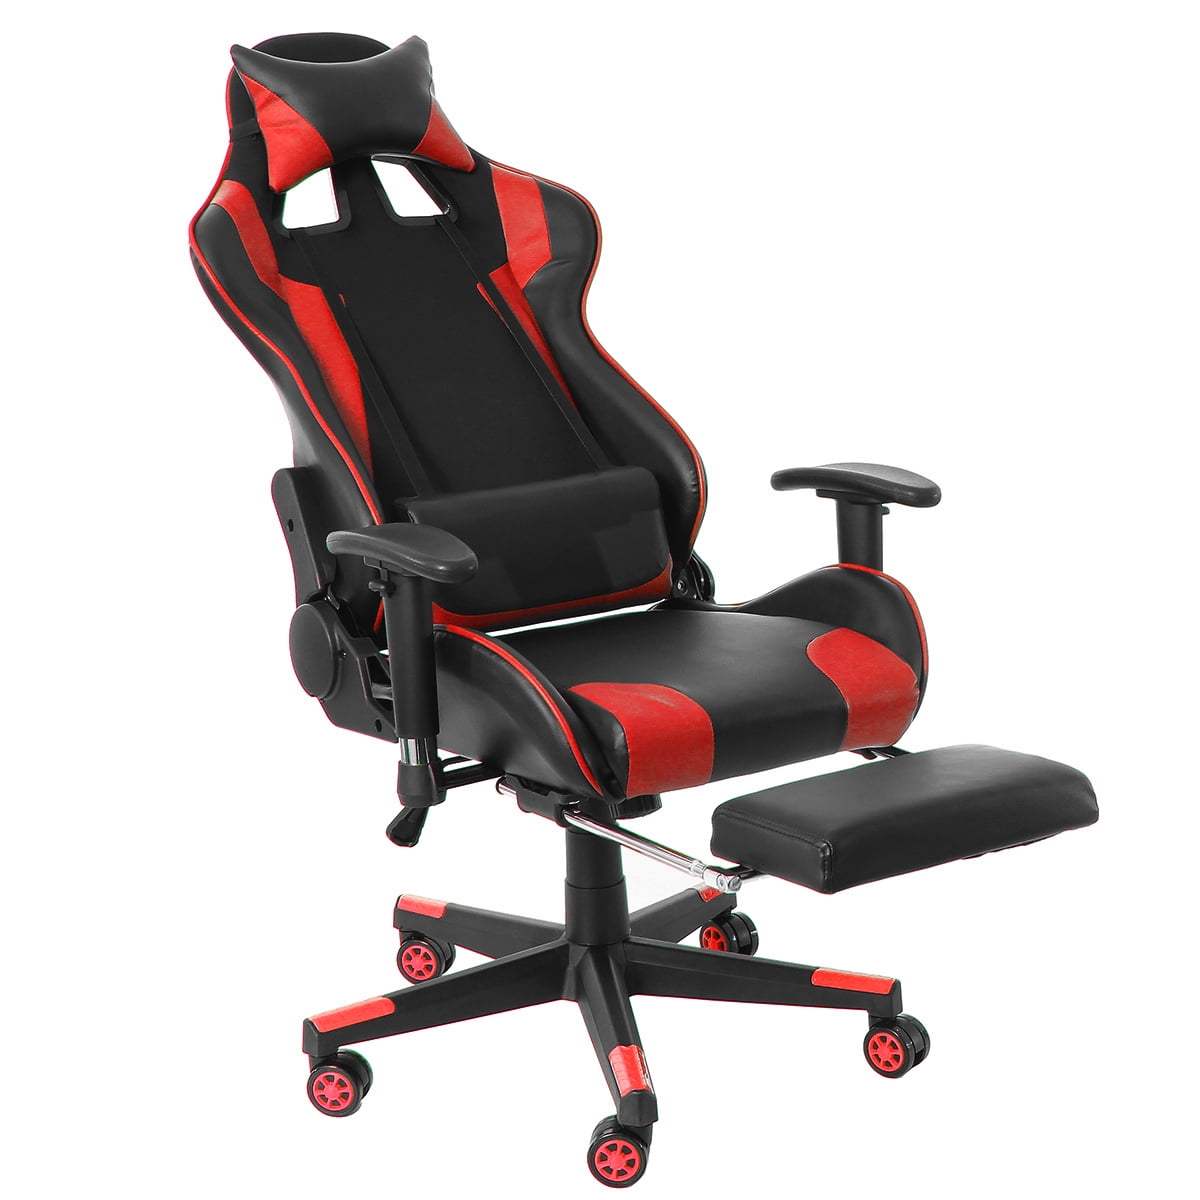 Details about   Gaming Chair High Back Swivel Racing Office Computer Chair with Footrest Tier 